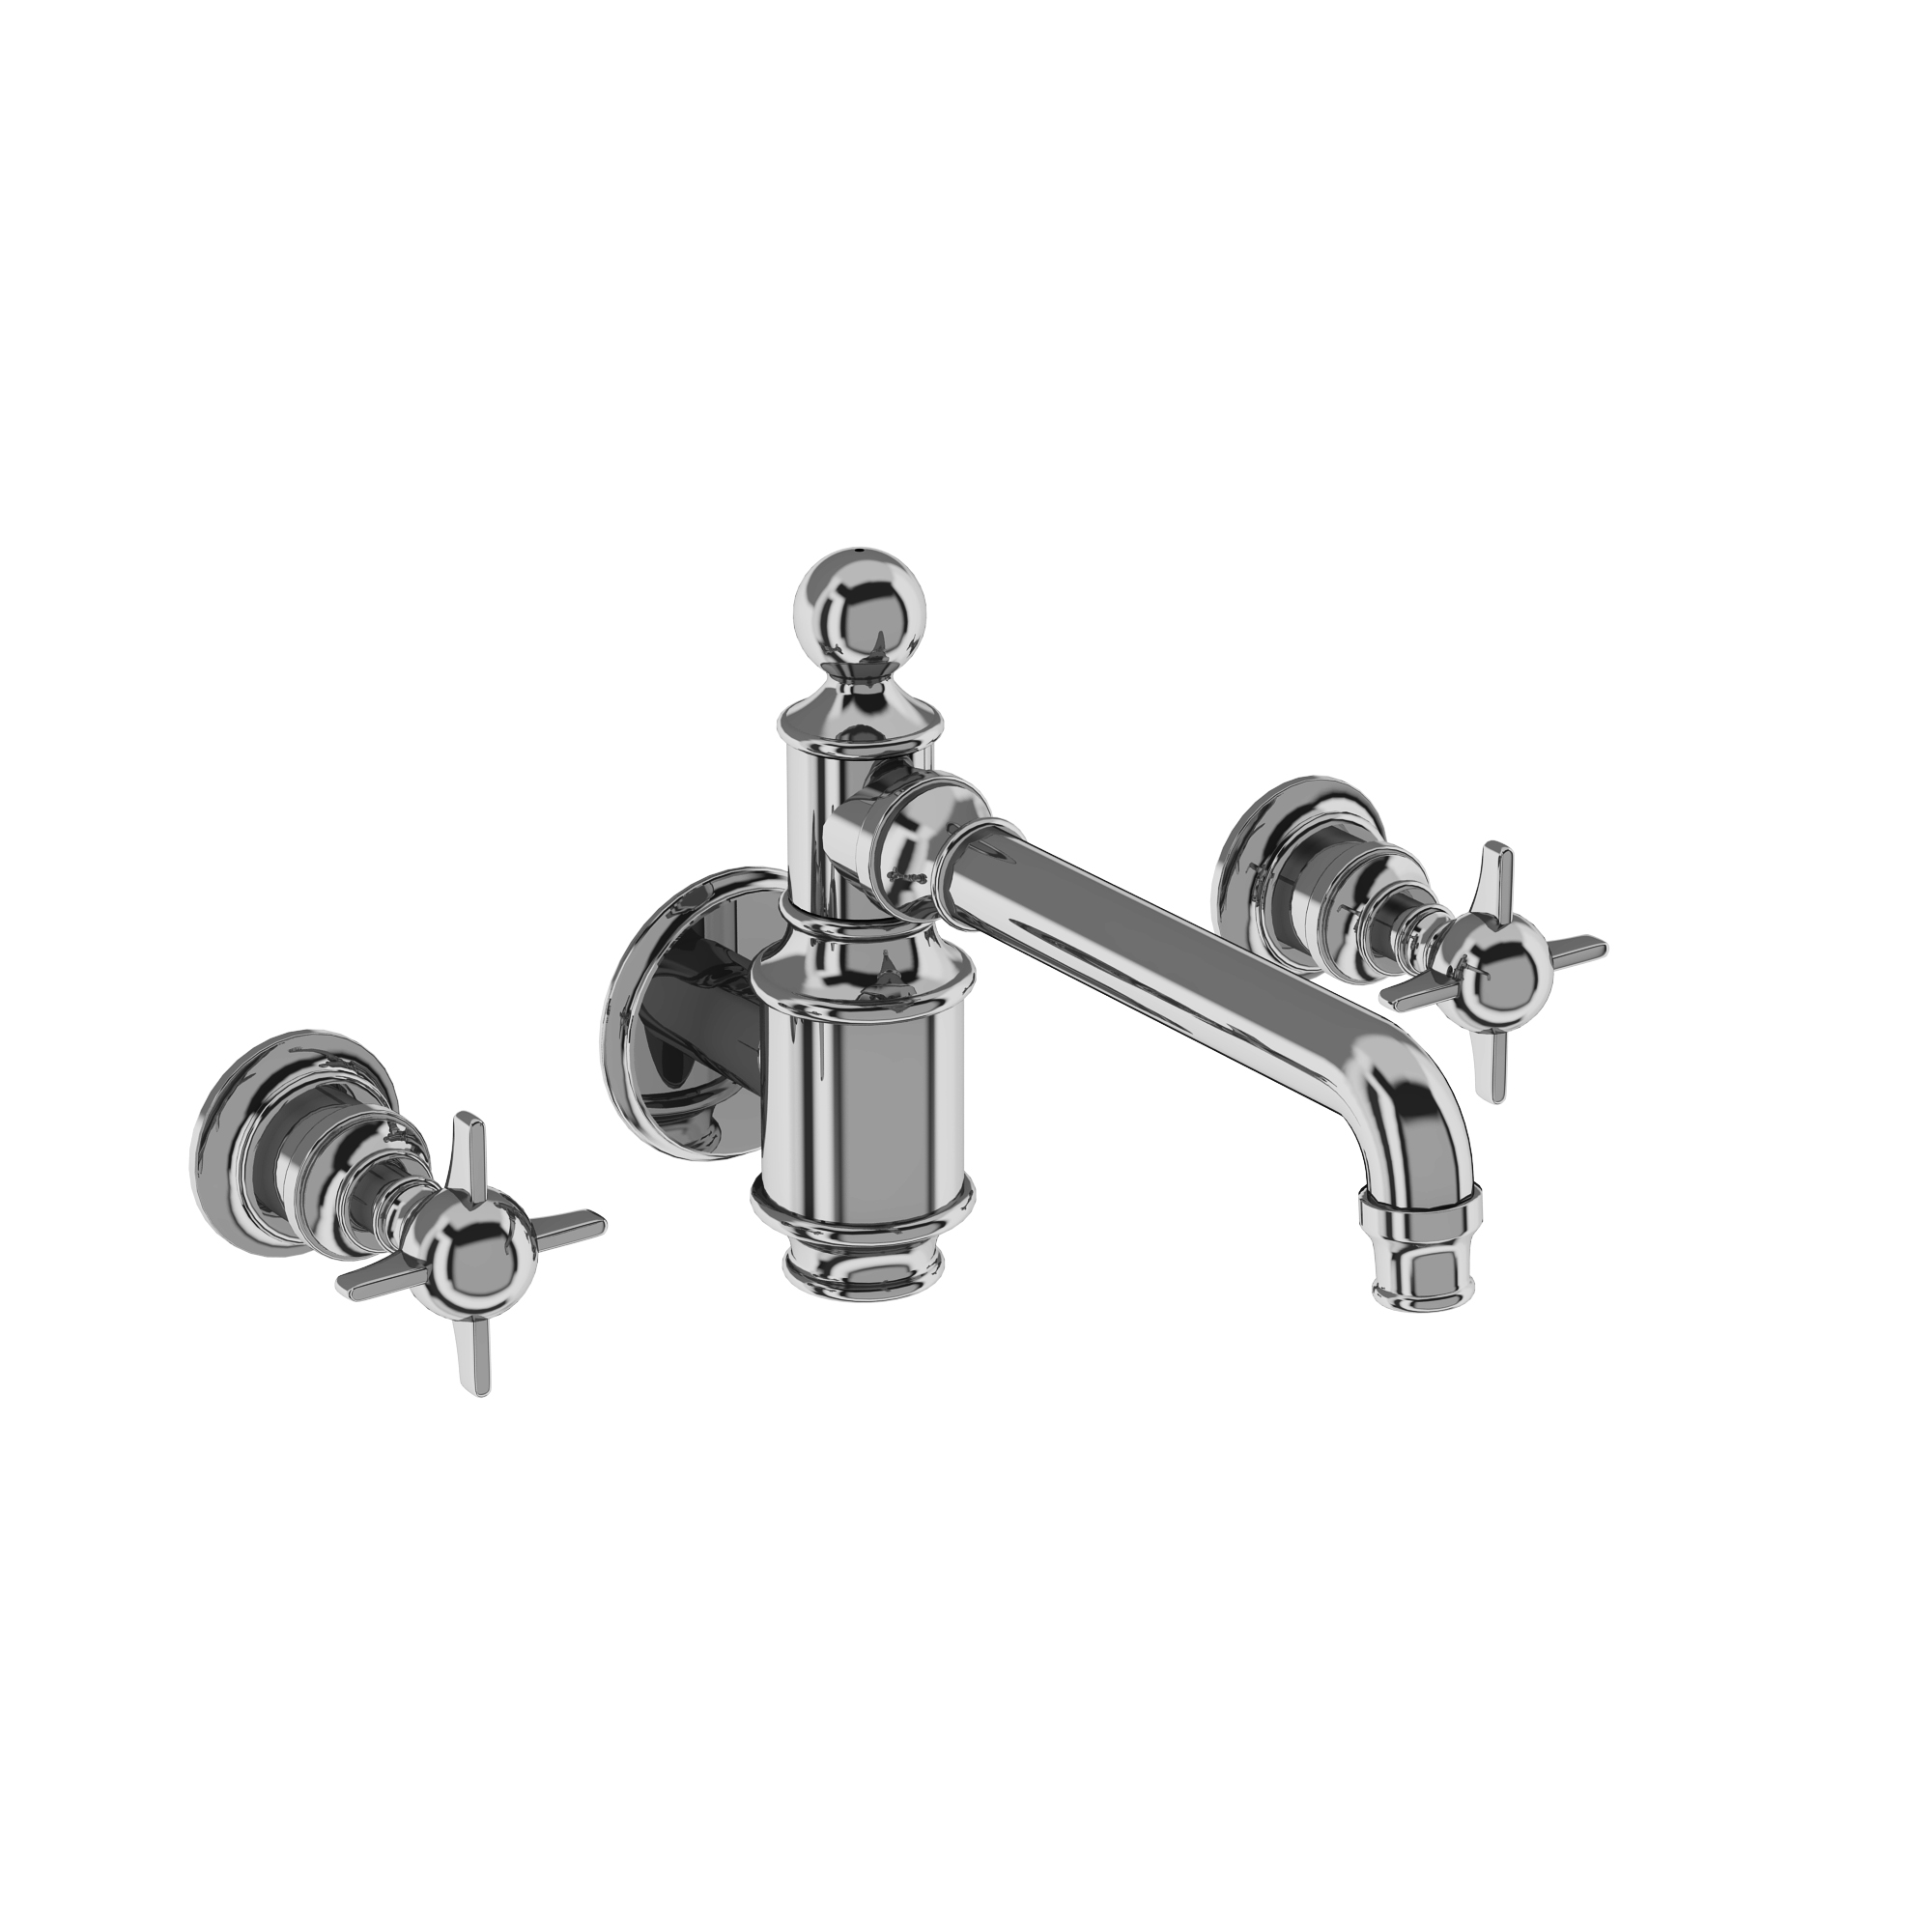 Arcade three hole basin mixer wall-mounted without pop up waste